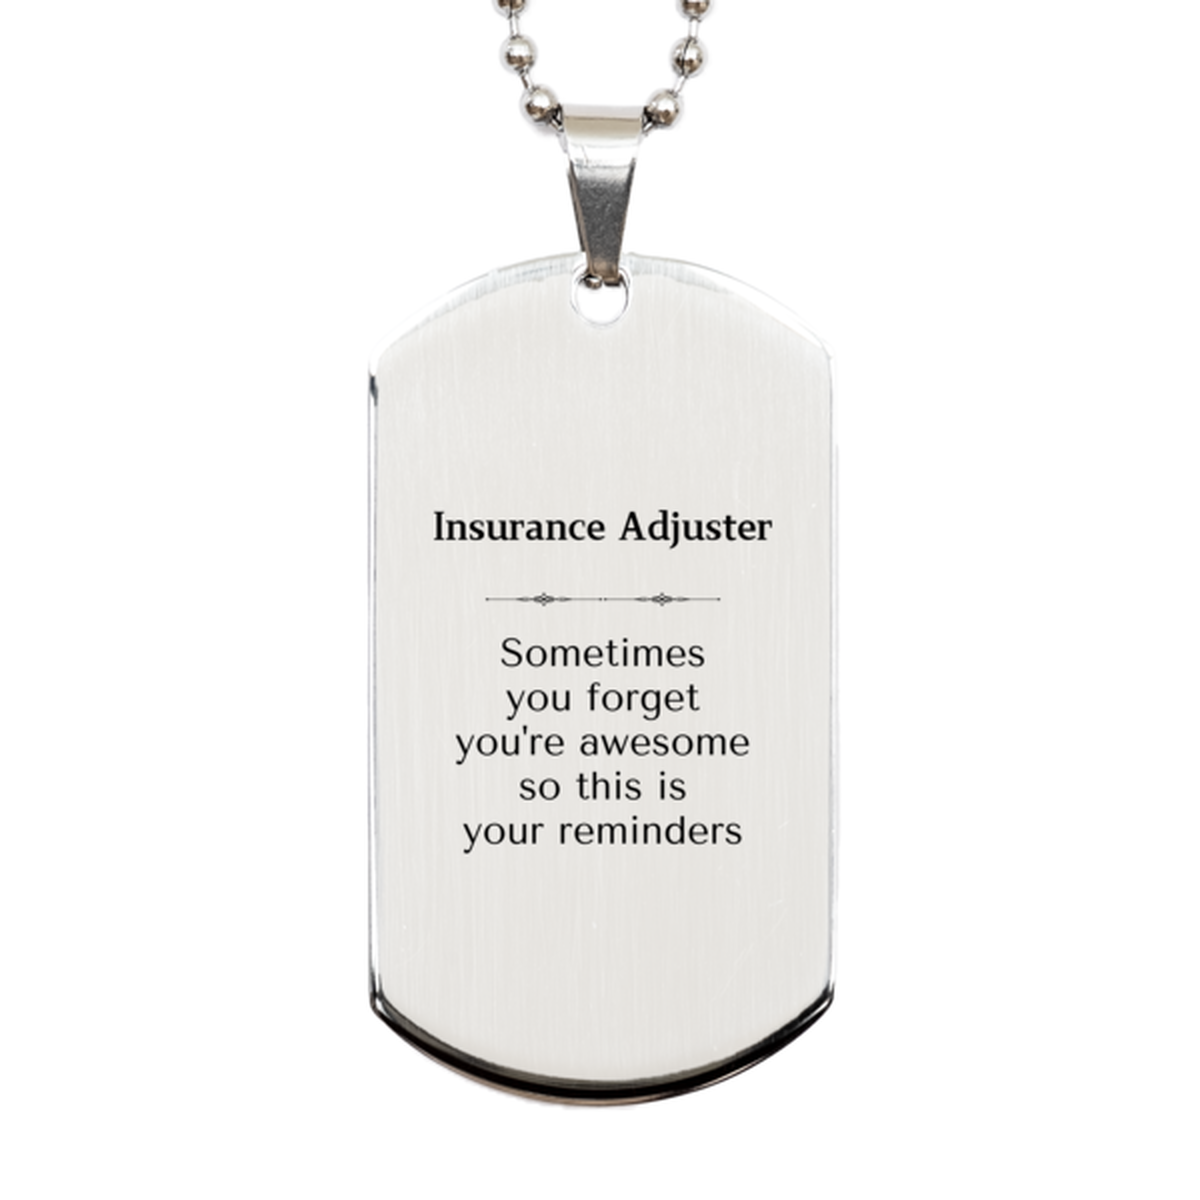 Sentimental Insurance Adjuster Silver Dog Tag, Insurance Adjuster Sometimes you forget you're awesome so this is your reminders, Graduation Christmas Birthday Gifts for Insurance Adjuster, Men, Women, Coworkers